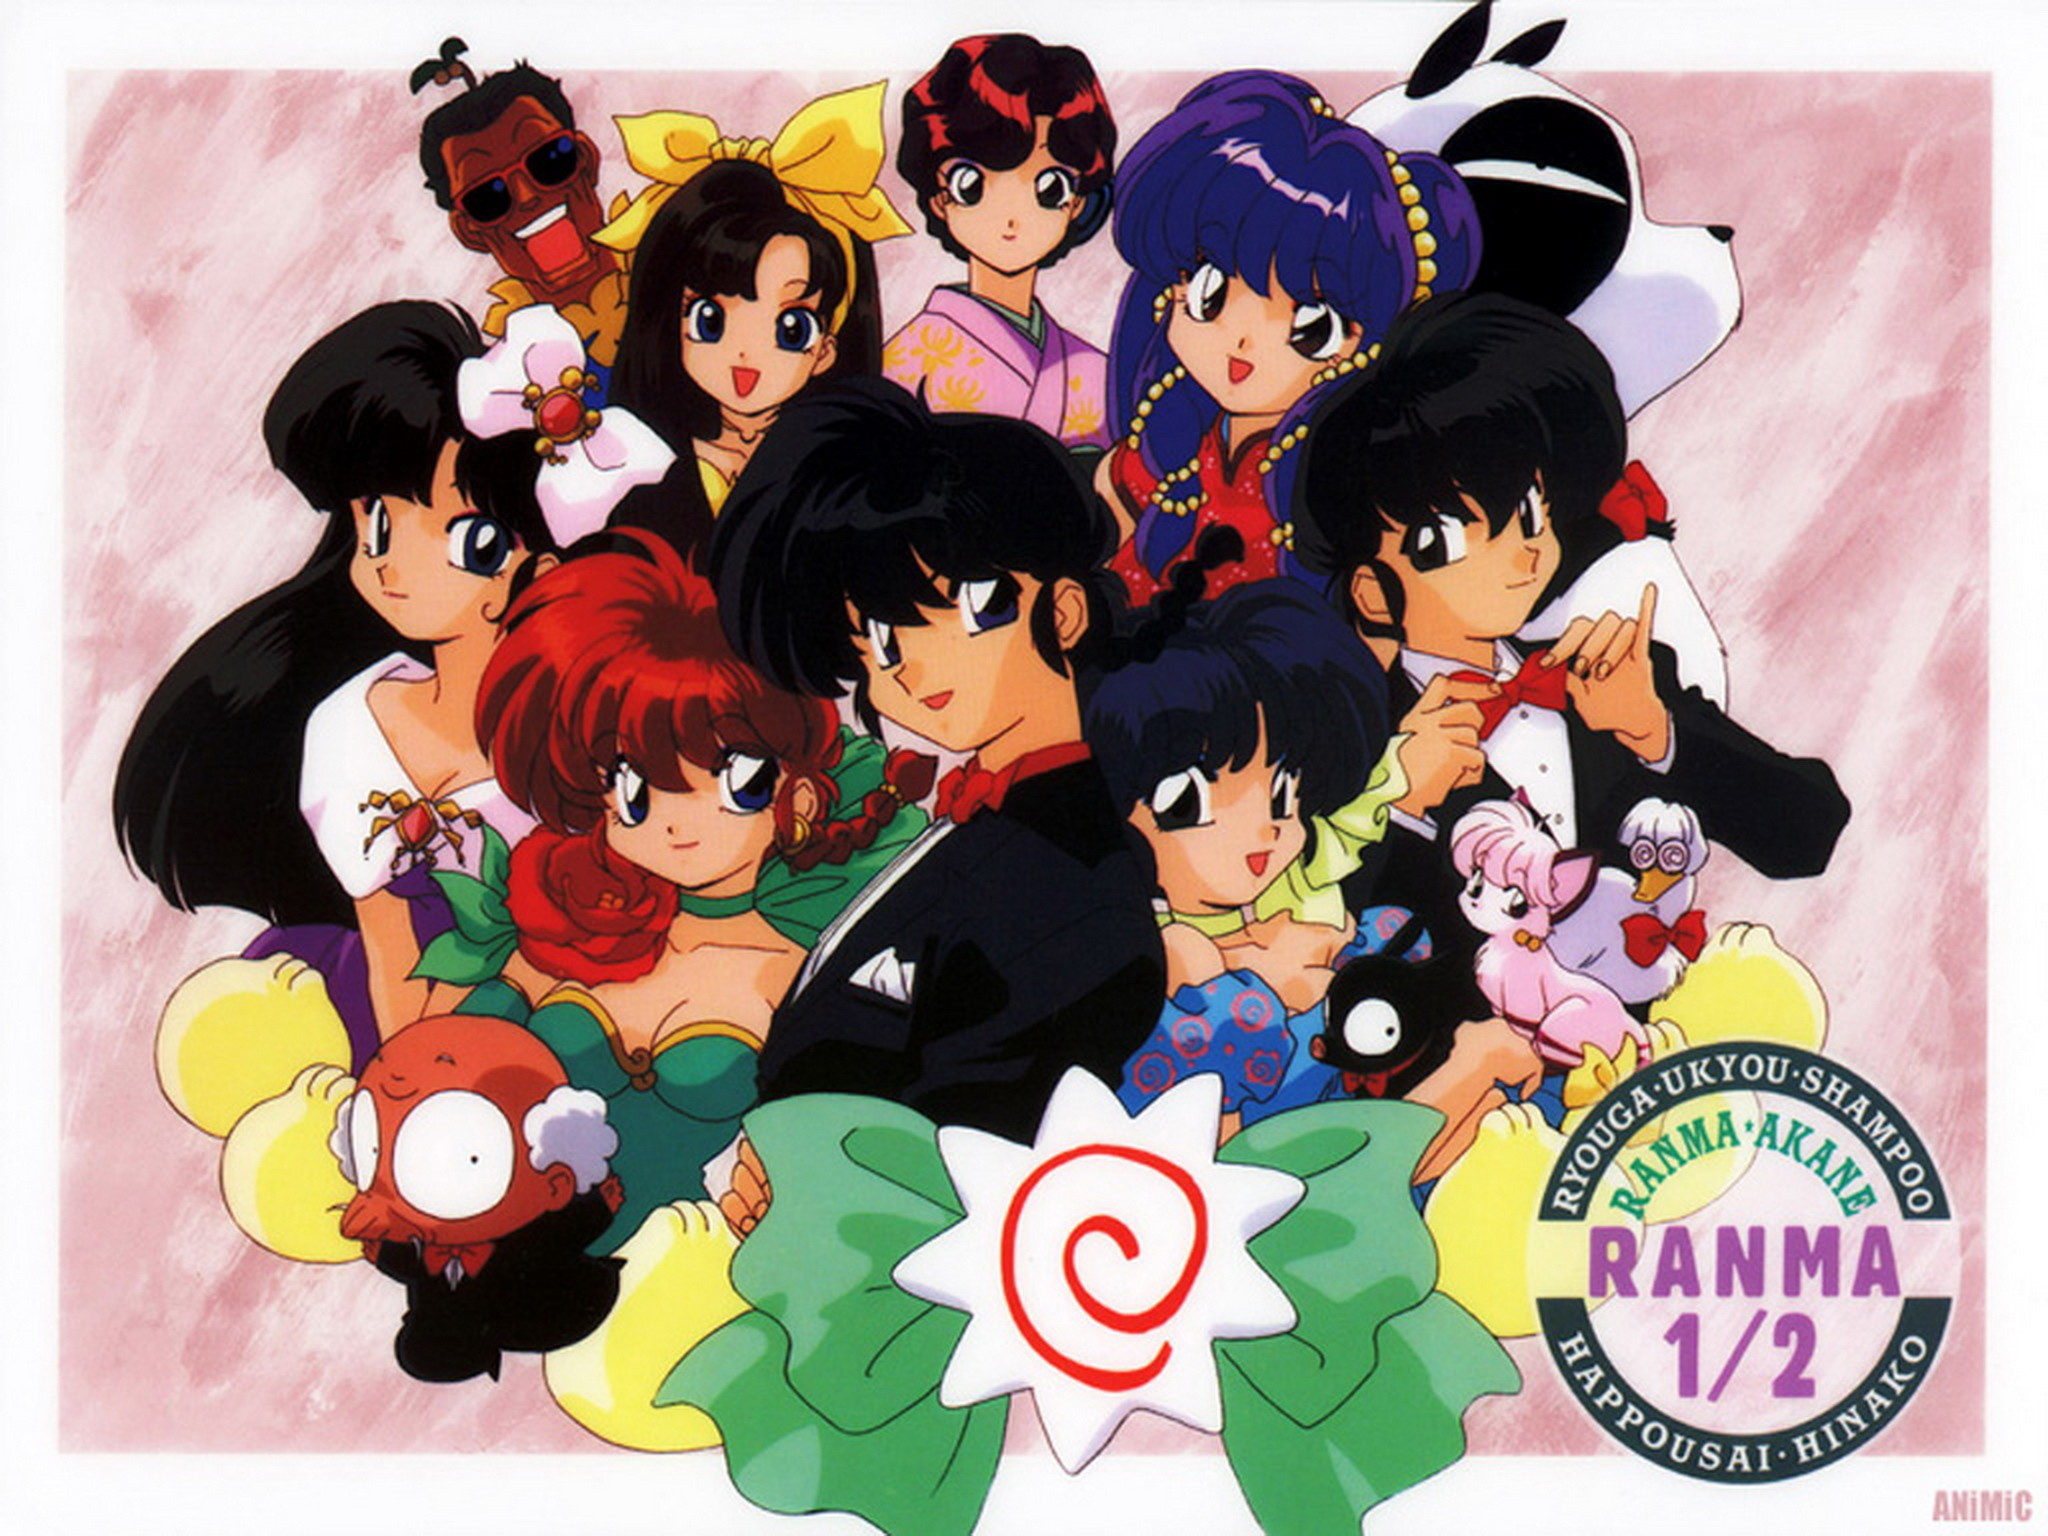 Watching Ranma an old school title that Ive never finished